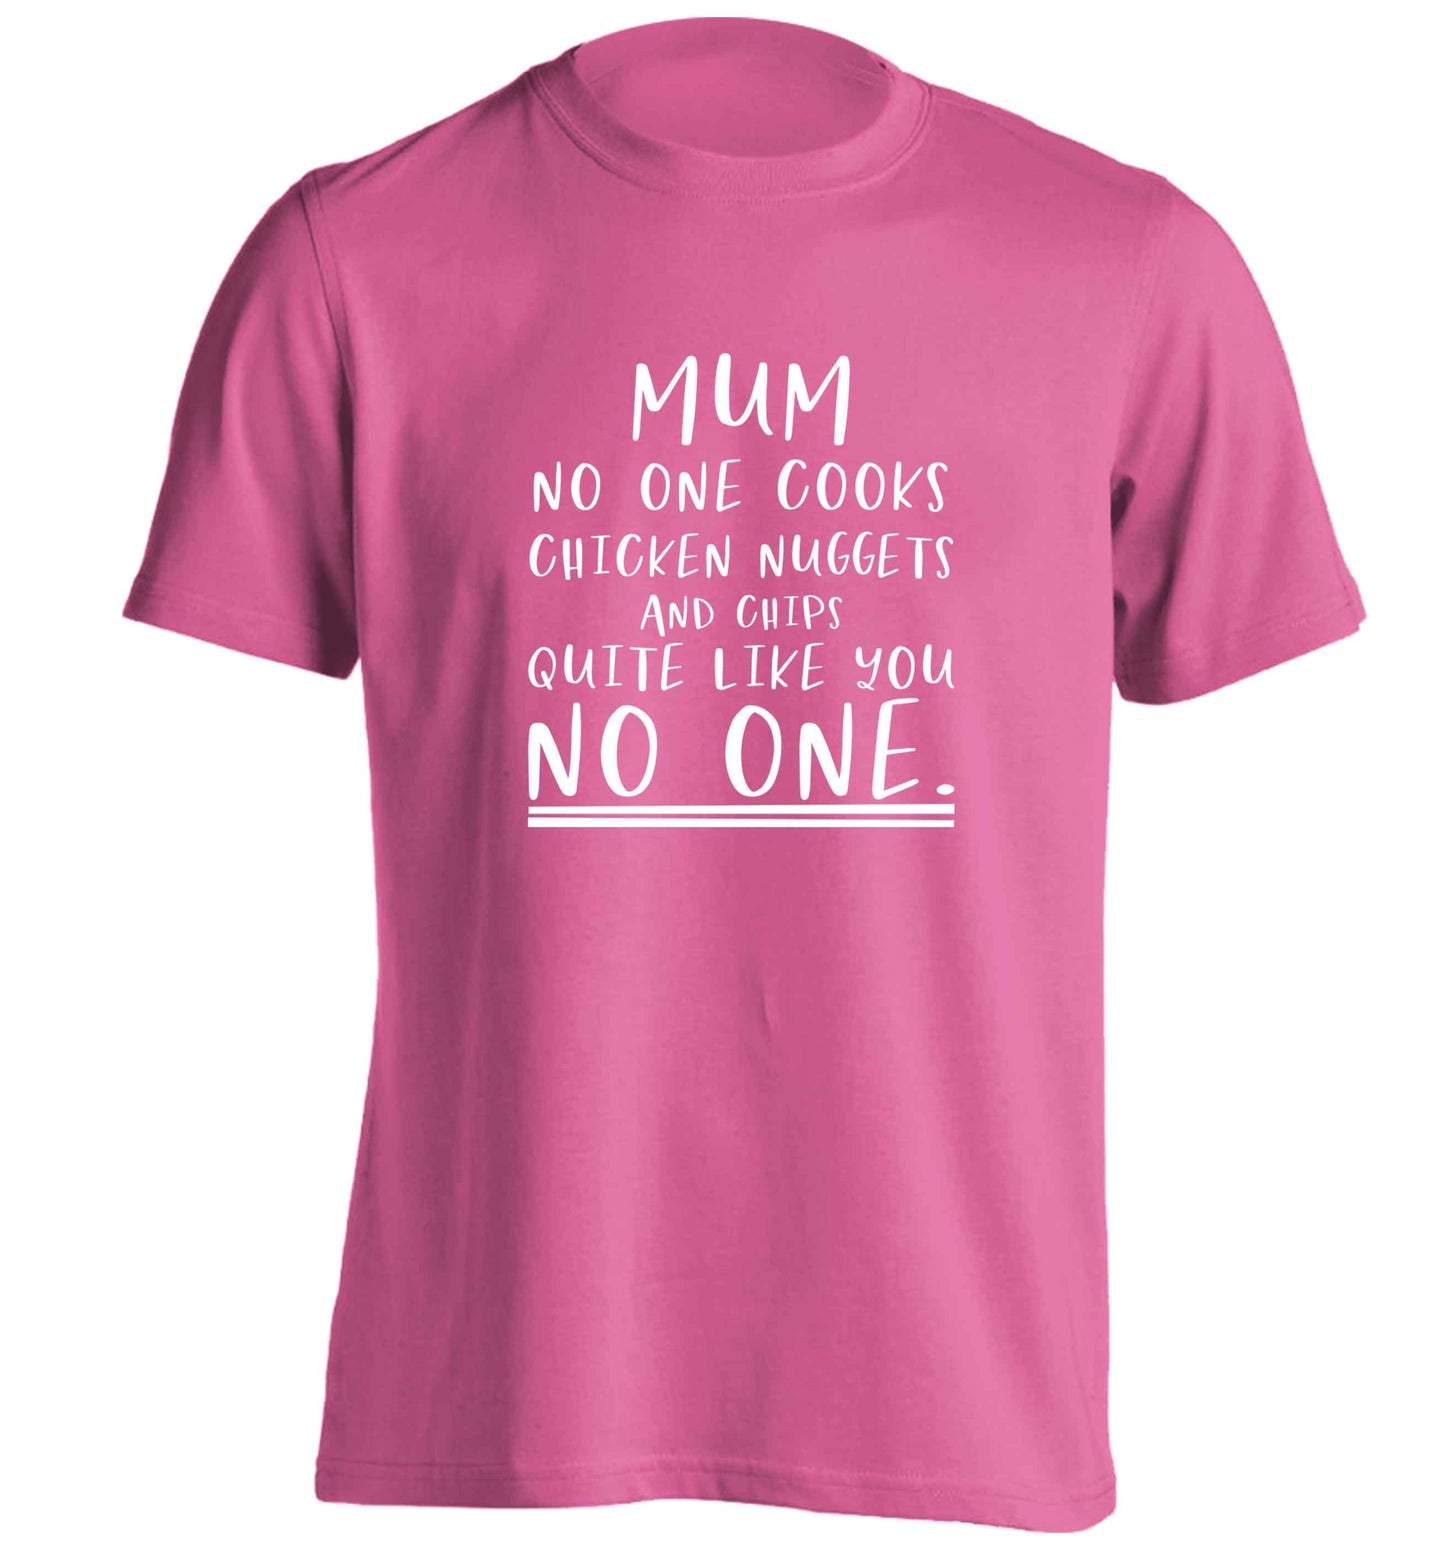 Super funny sassy gift for mother's day or birthday!  Mum no one cooks chicken nuggets and chips like you no one adults unisex pink Tshirt 2XL